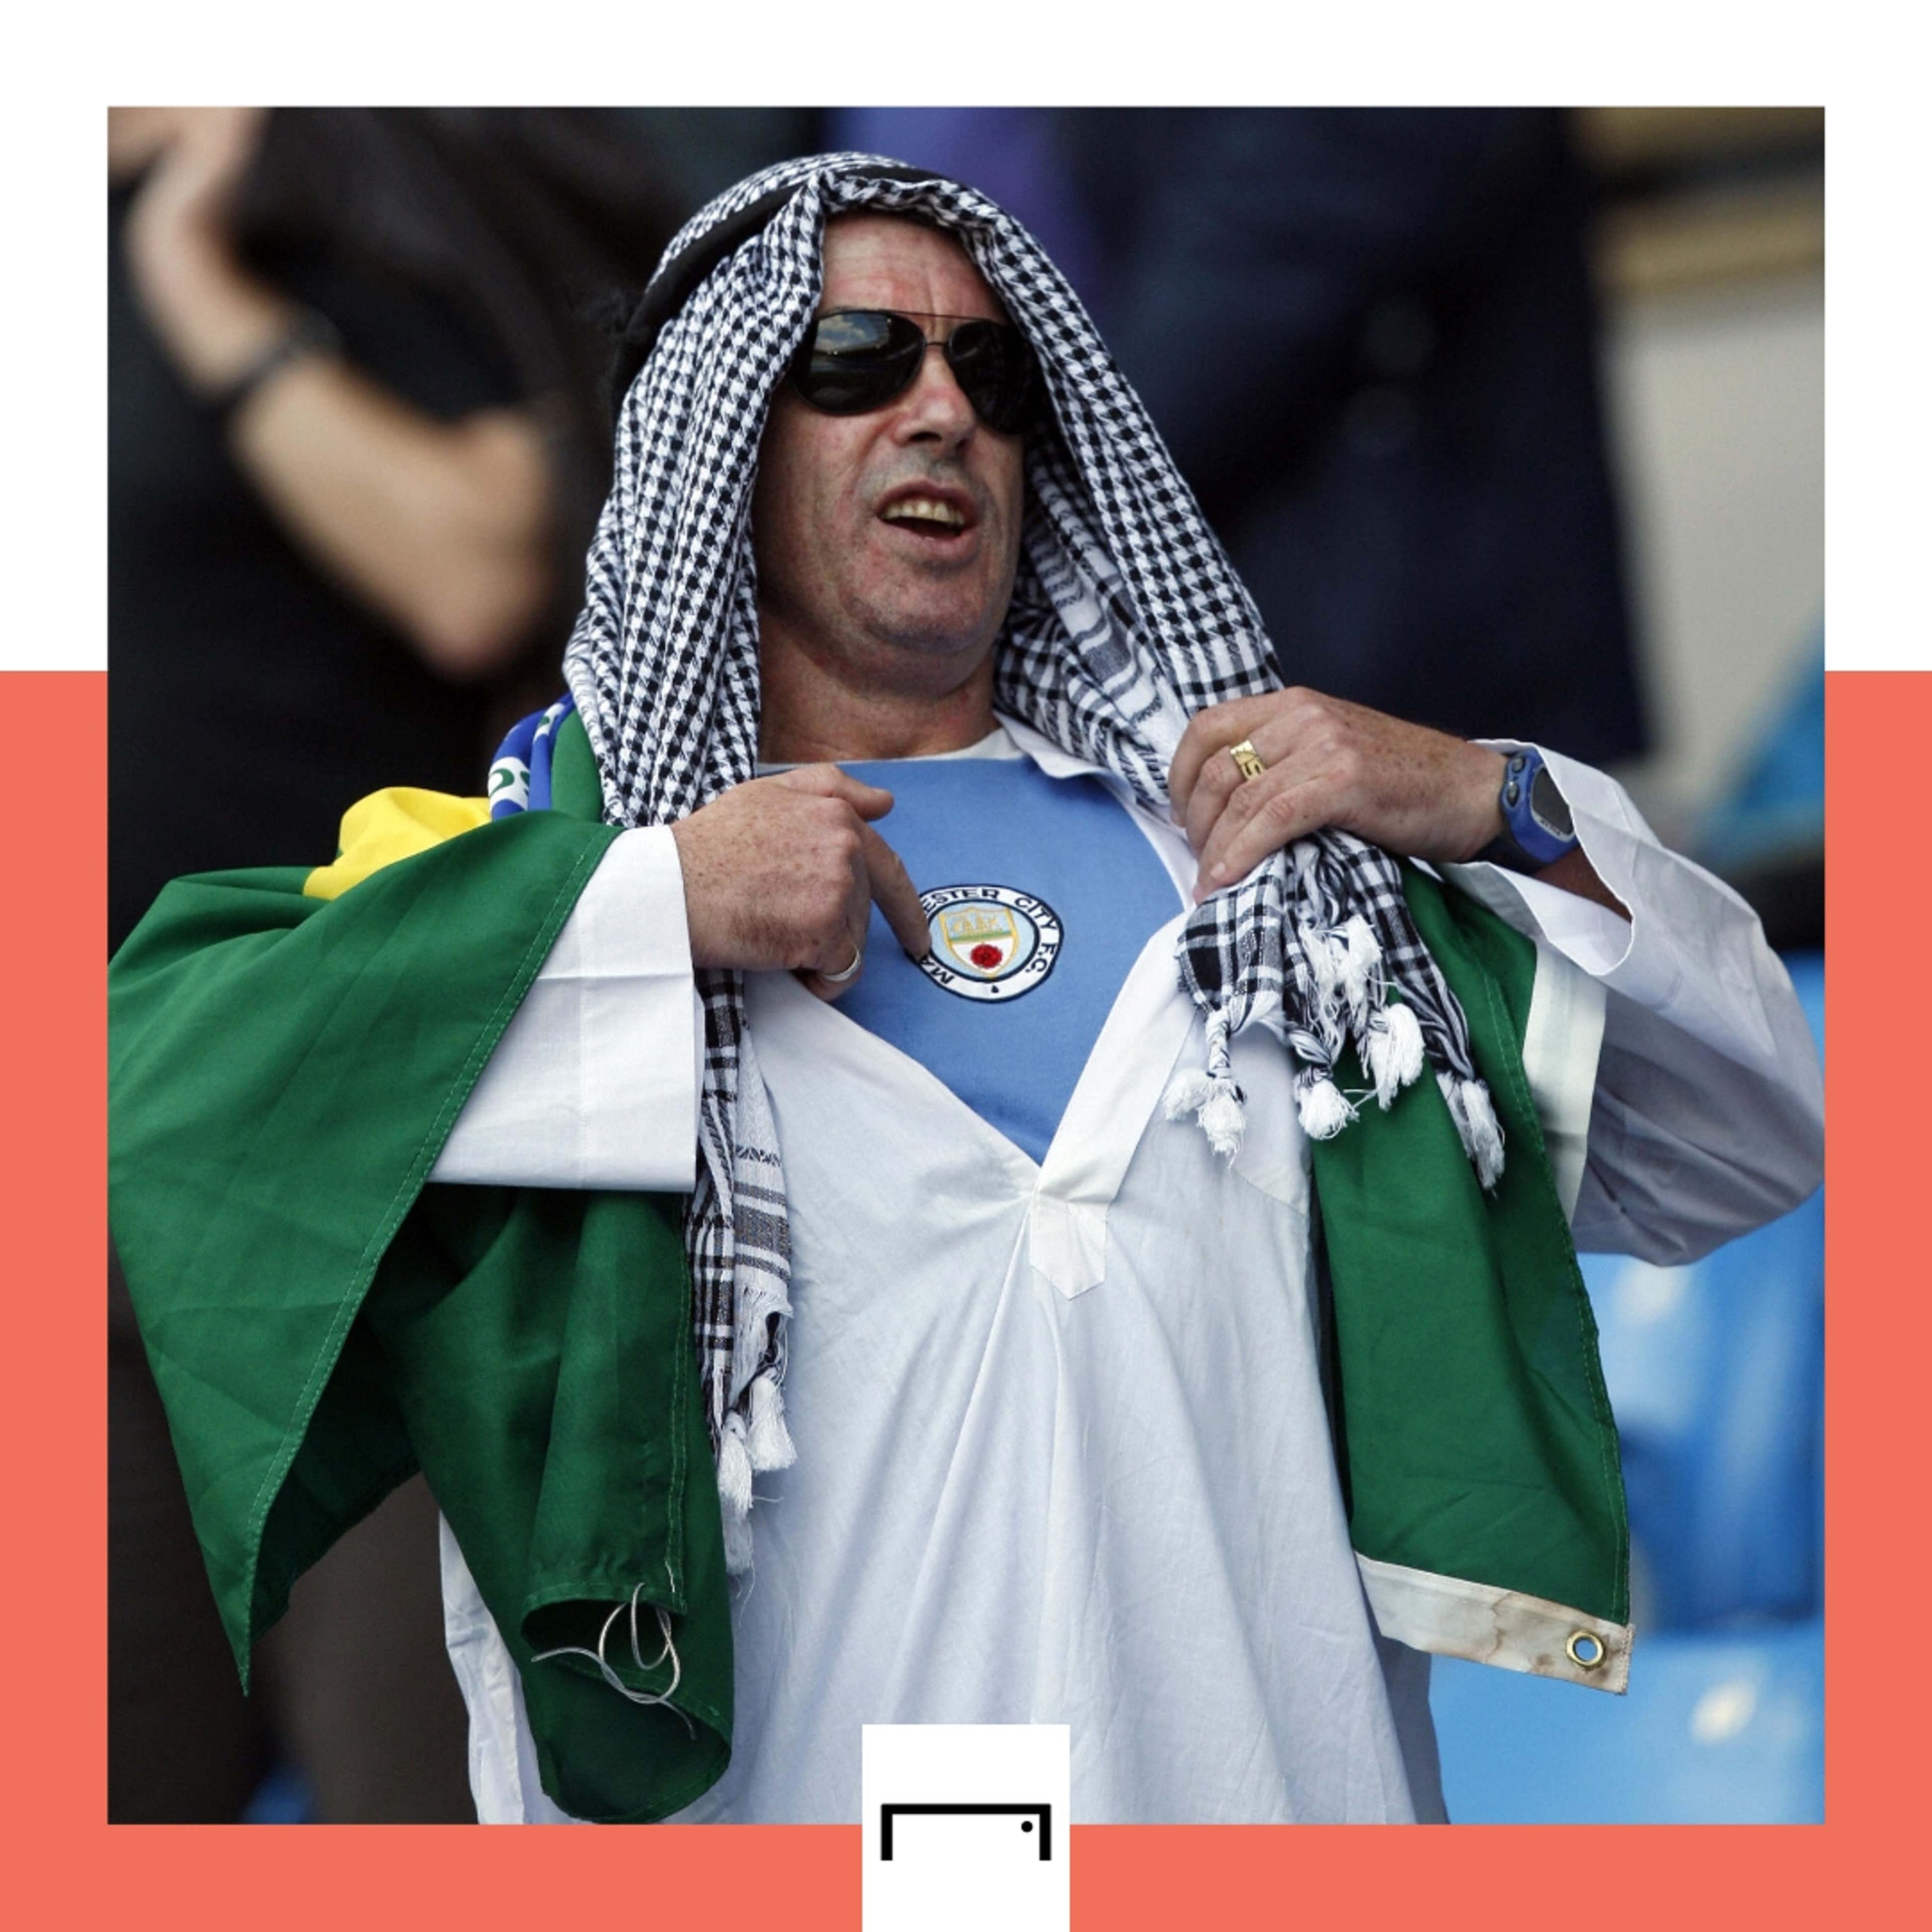 Manchester City supporter Abu Dhabi takeover 2008 GFX